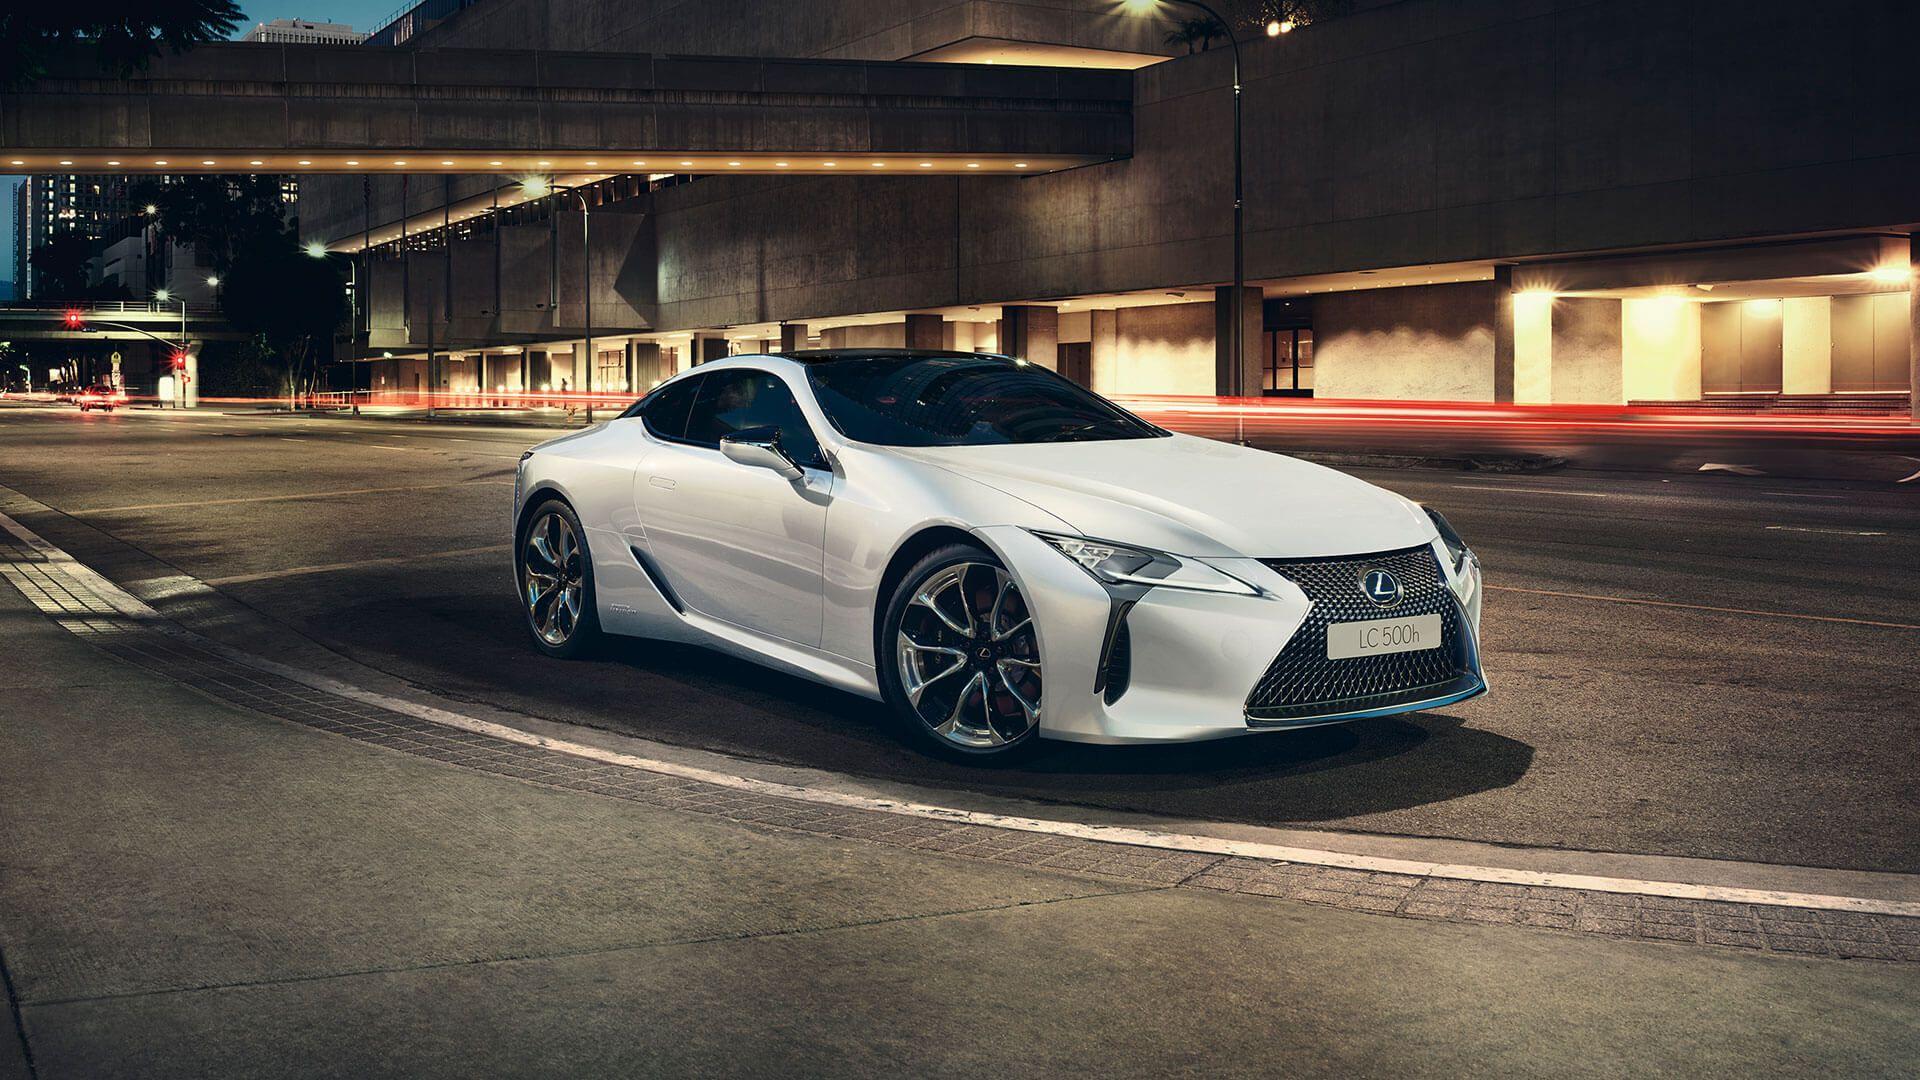 According to sources, the #Lexus LCF WILL happen in the not so